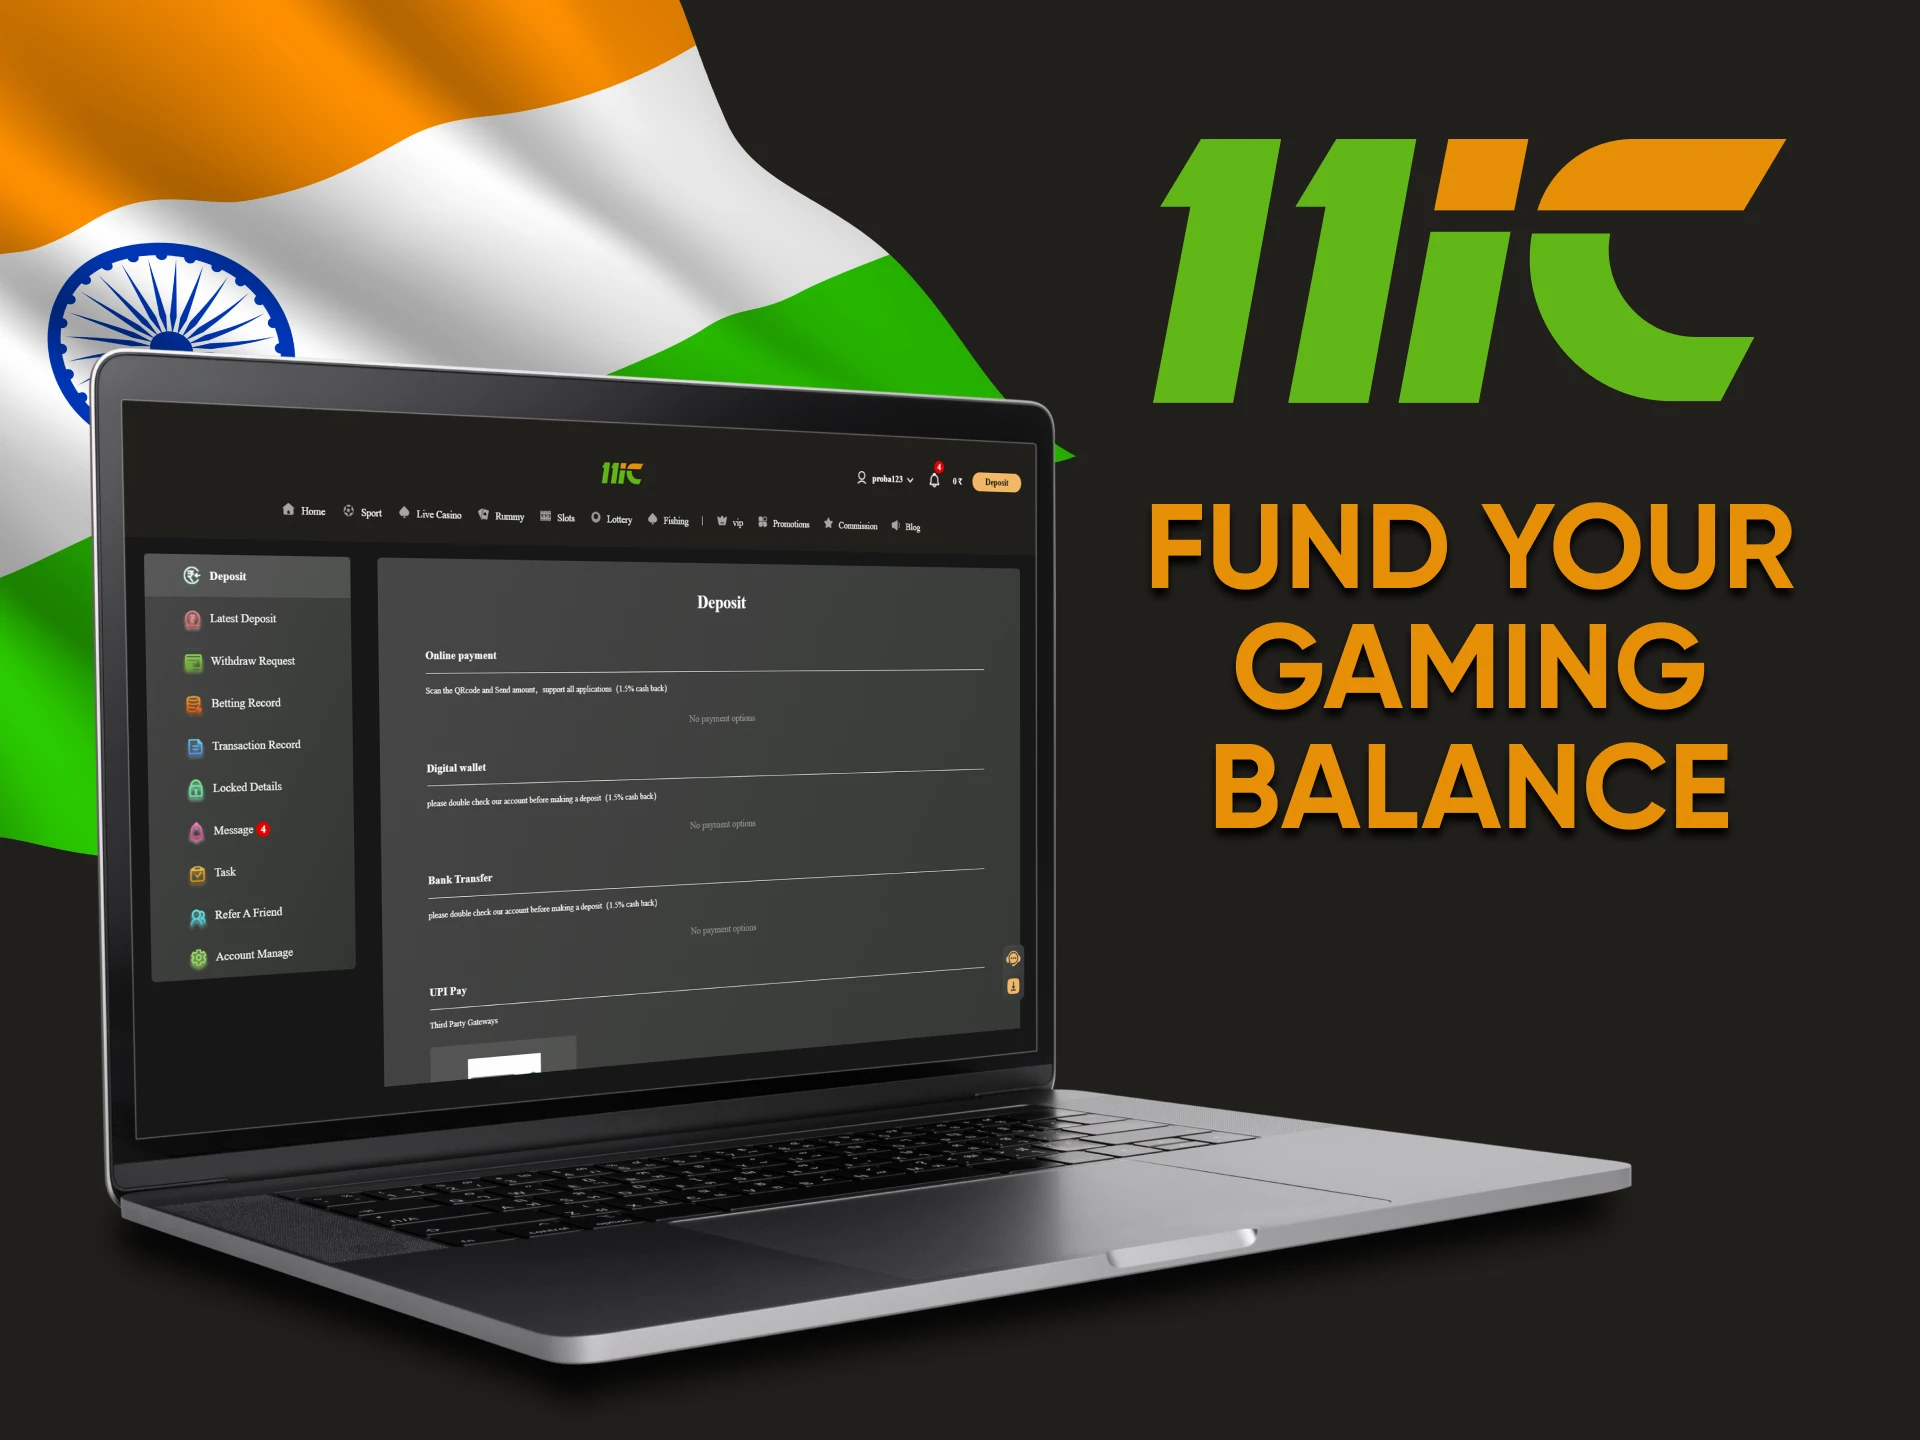 Top up your deposit for betting on 11ic.